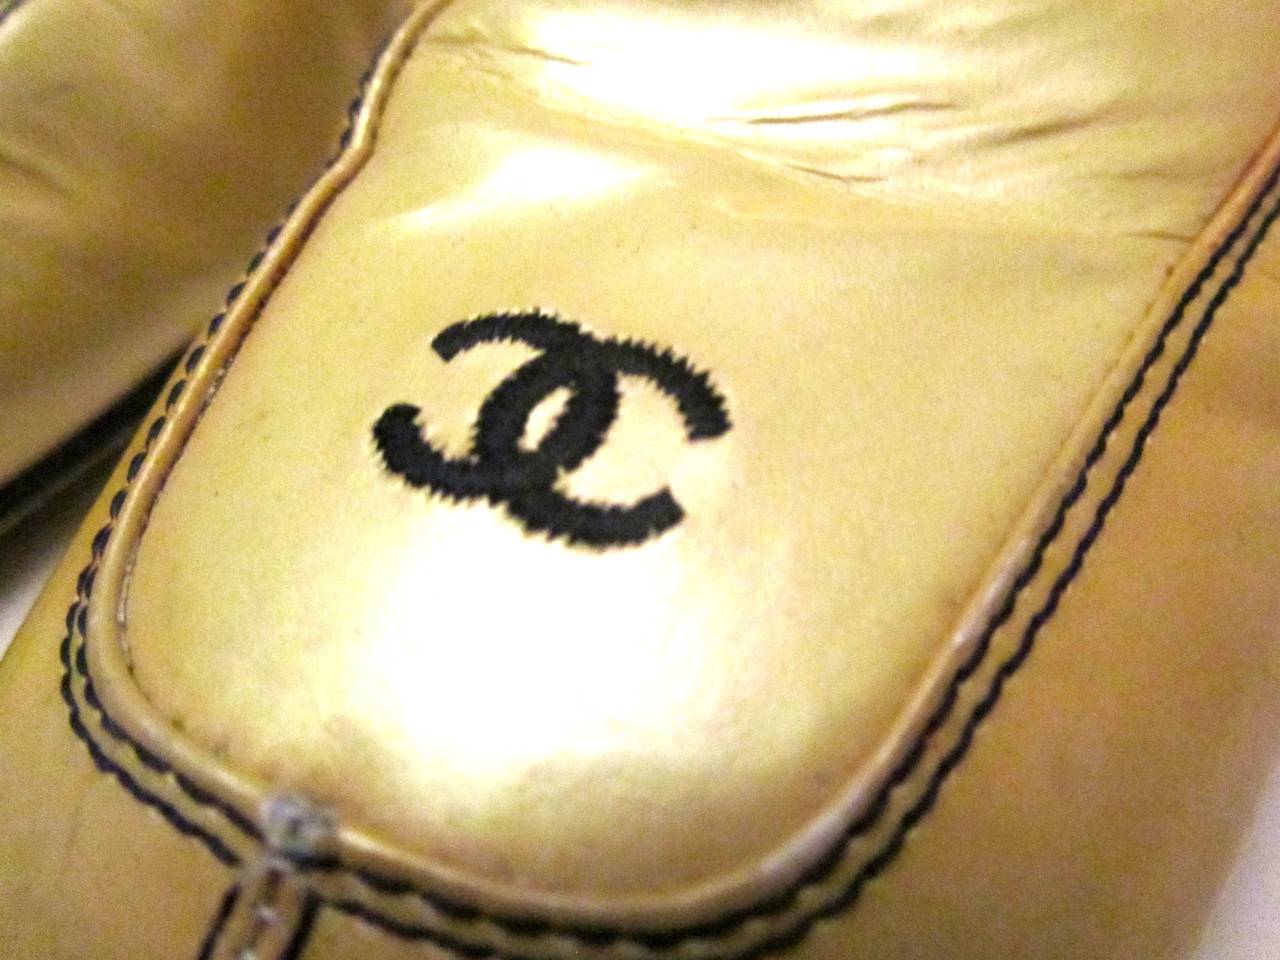 Women's Pre-1980's Chanel Pumps - Patent Leather - Yellow - Size 40